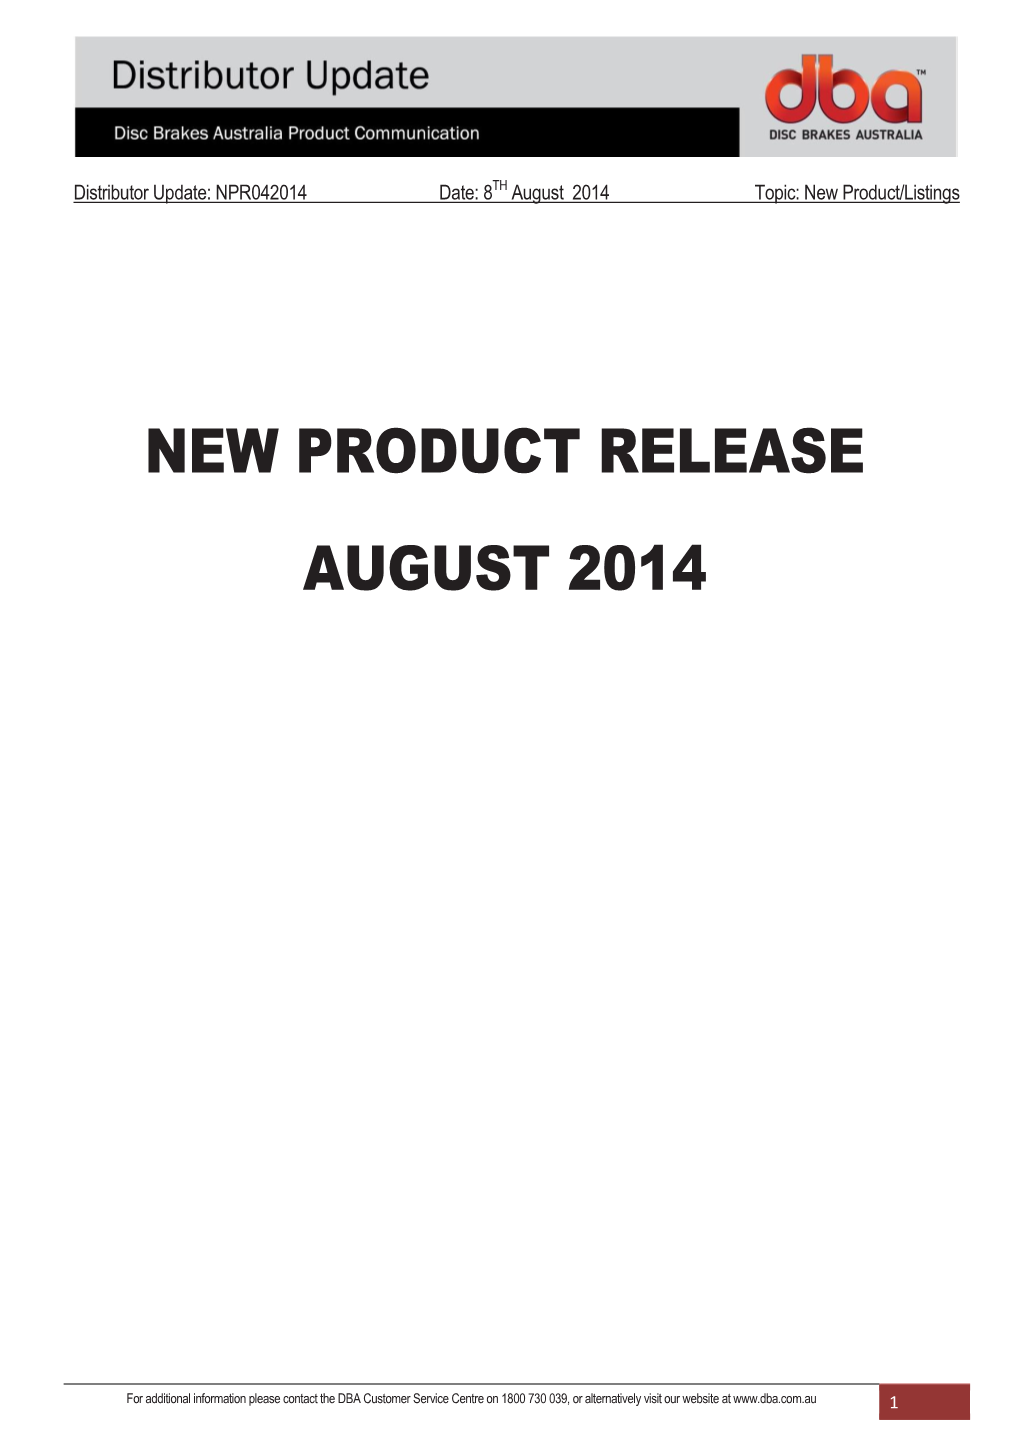 New Product Release August 2014